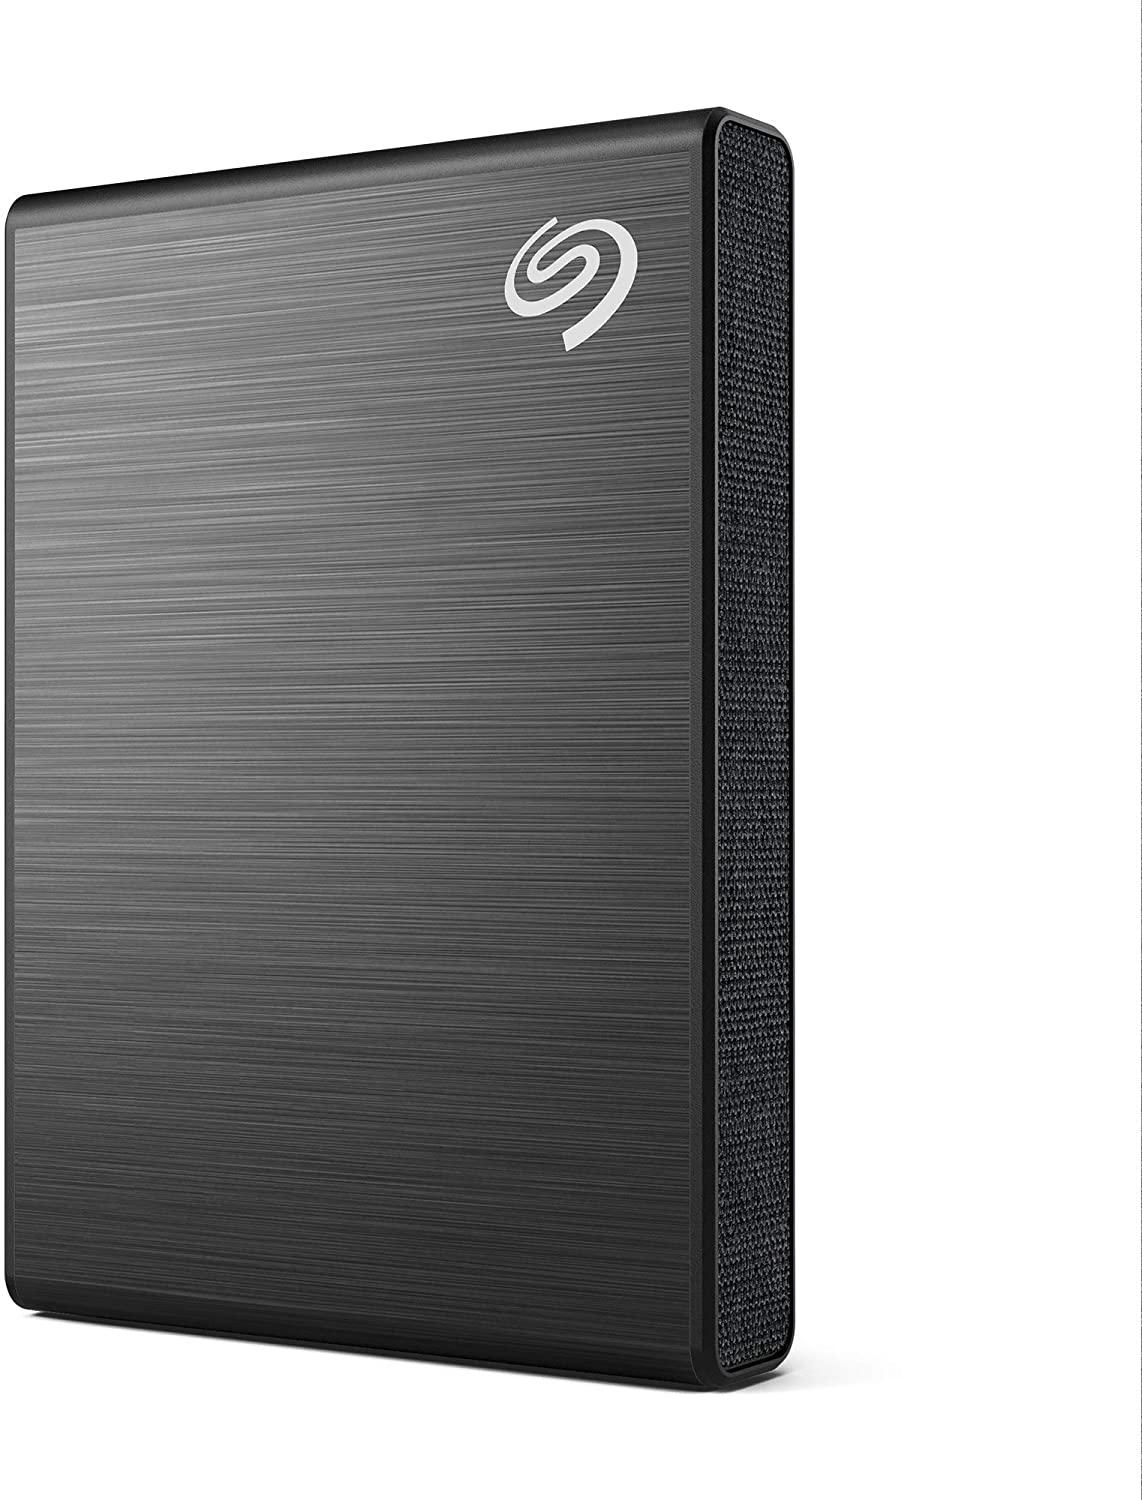 SSD Externo Portátil Seagate One Touch, 2TB, USB C, Negro